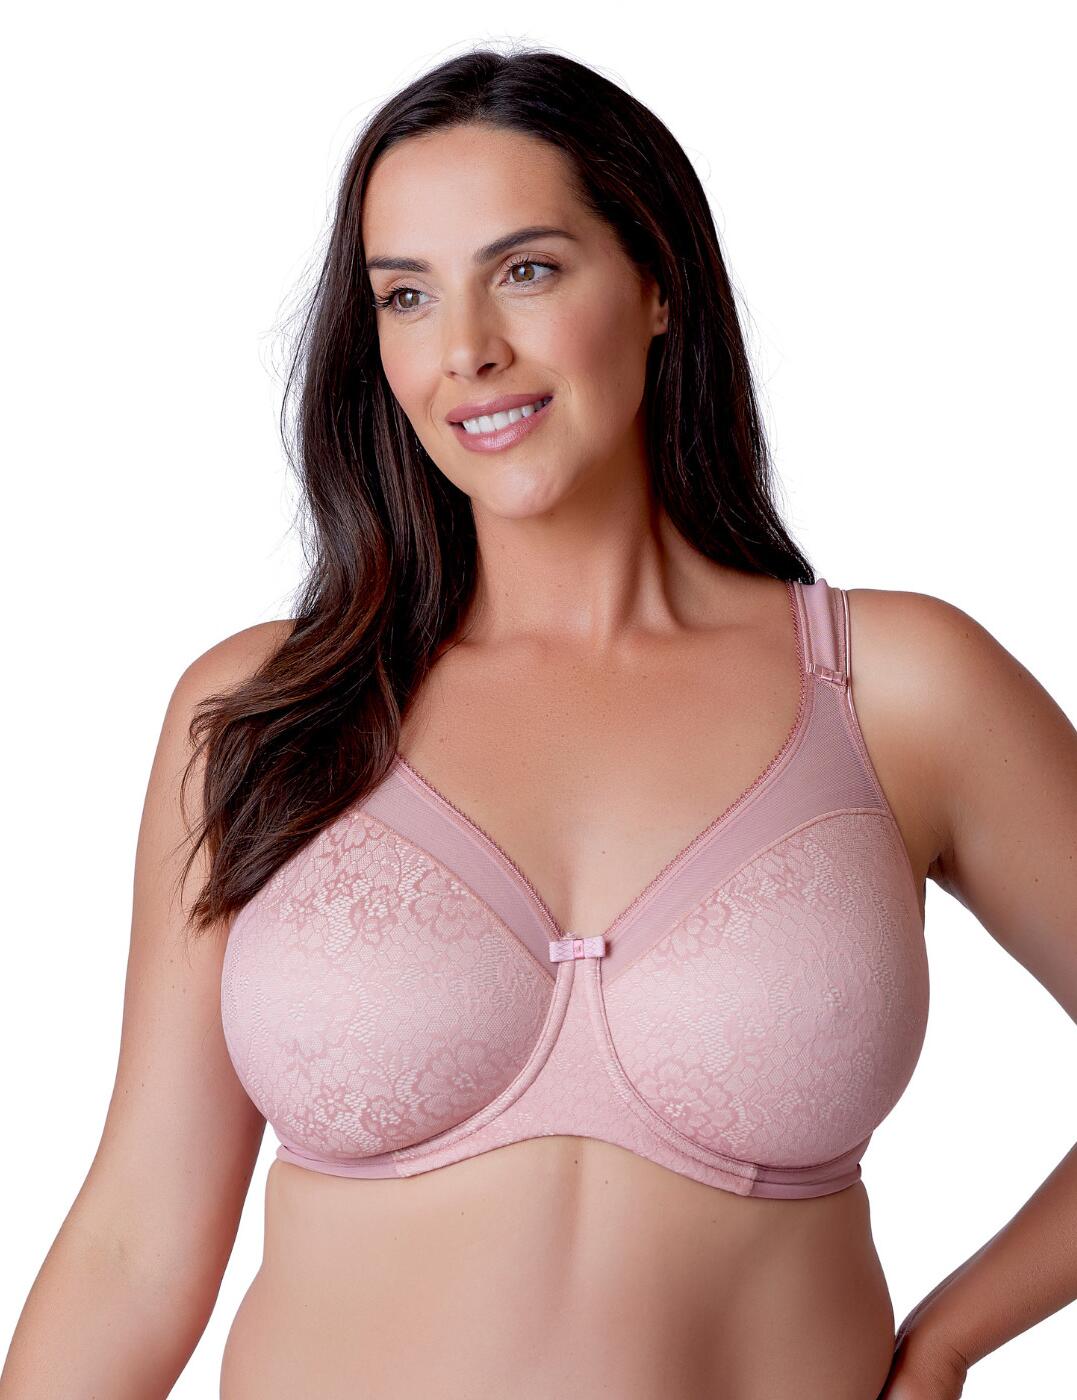 Berlei Lingerie - Our Berlei Beauty Minimiser Bra with matching Deep Briefs  offer total support whilst looking delicate and feminine Check out our  Beauty Minimiser Bra in the link -  .com/products/Shapewear/Minimiser-Bras/Beauty